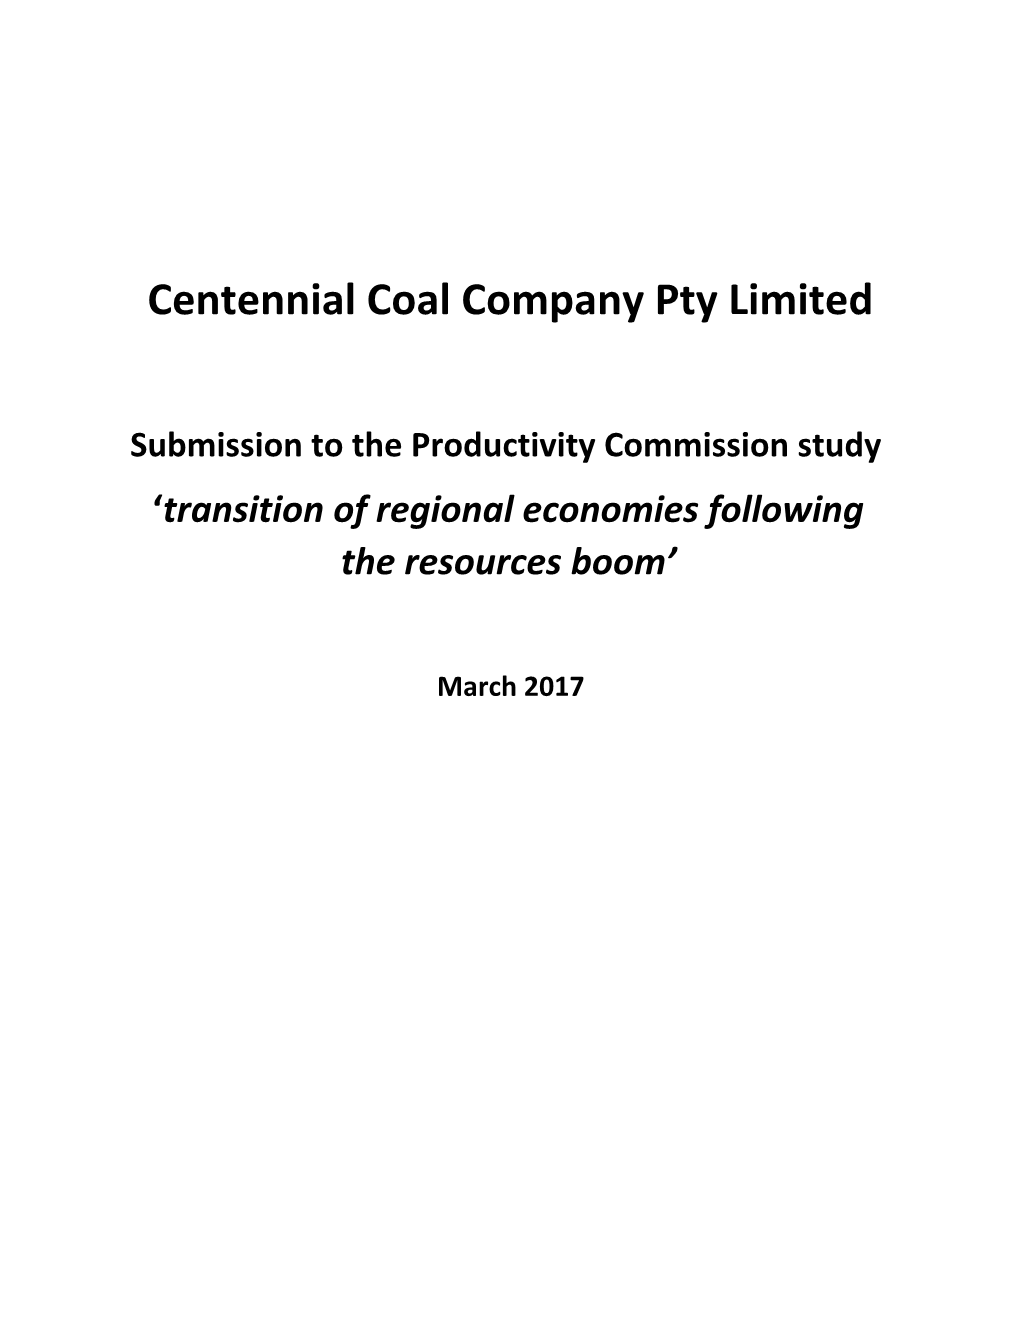 Submission 29 - Centennial Coal Company - Transitioning Regional Economies - Commissioned Study